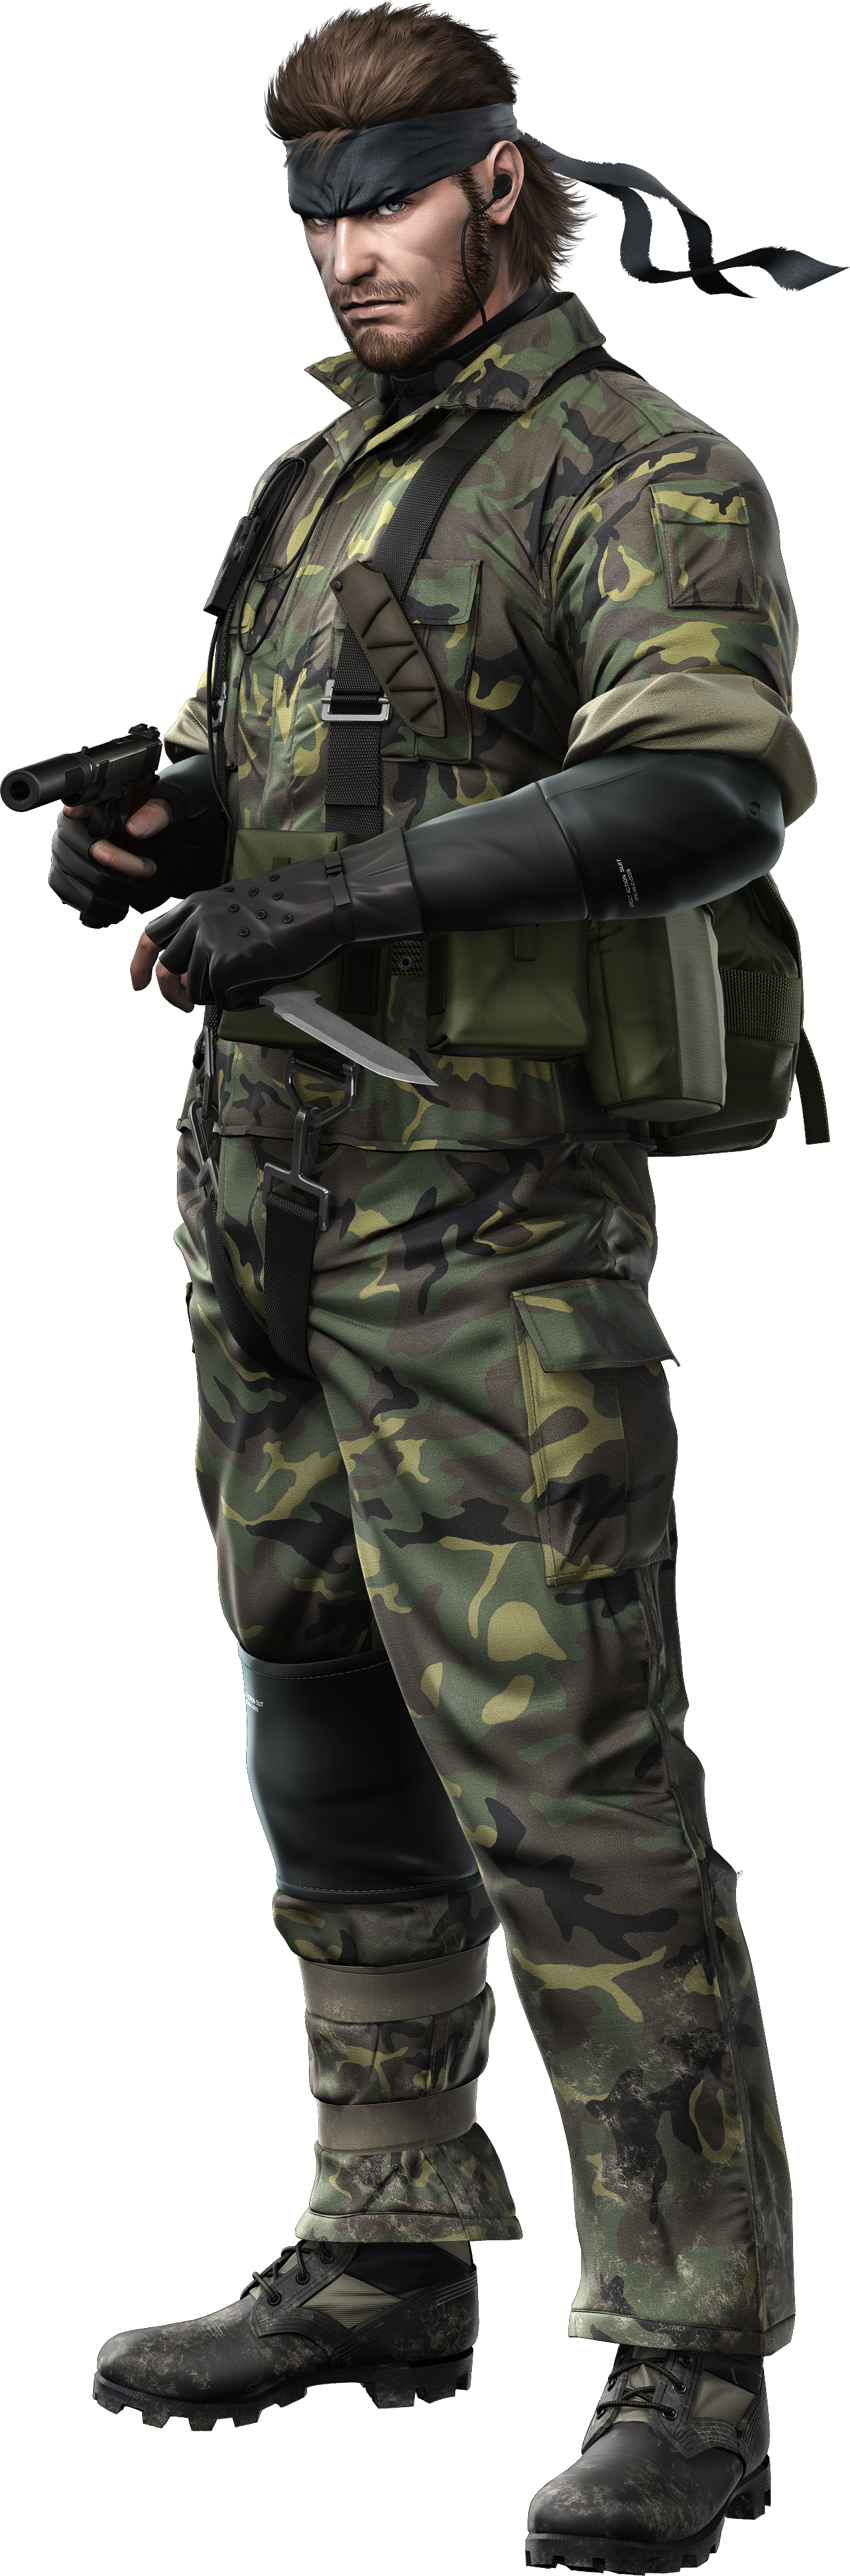 Solid Metal Gear Download HQ PNG Image